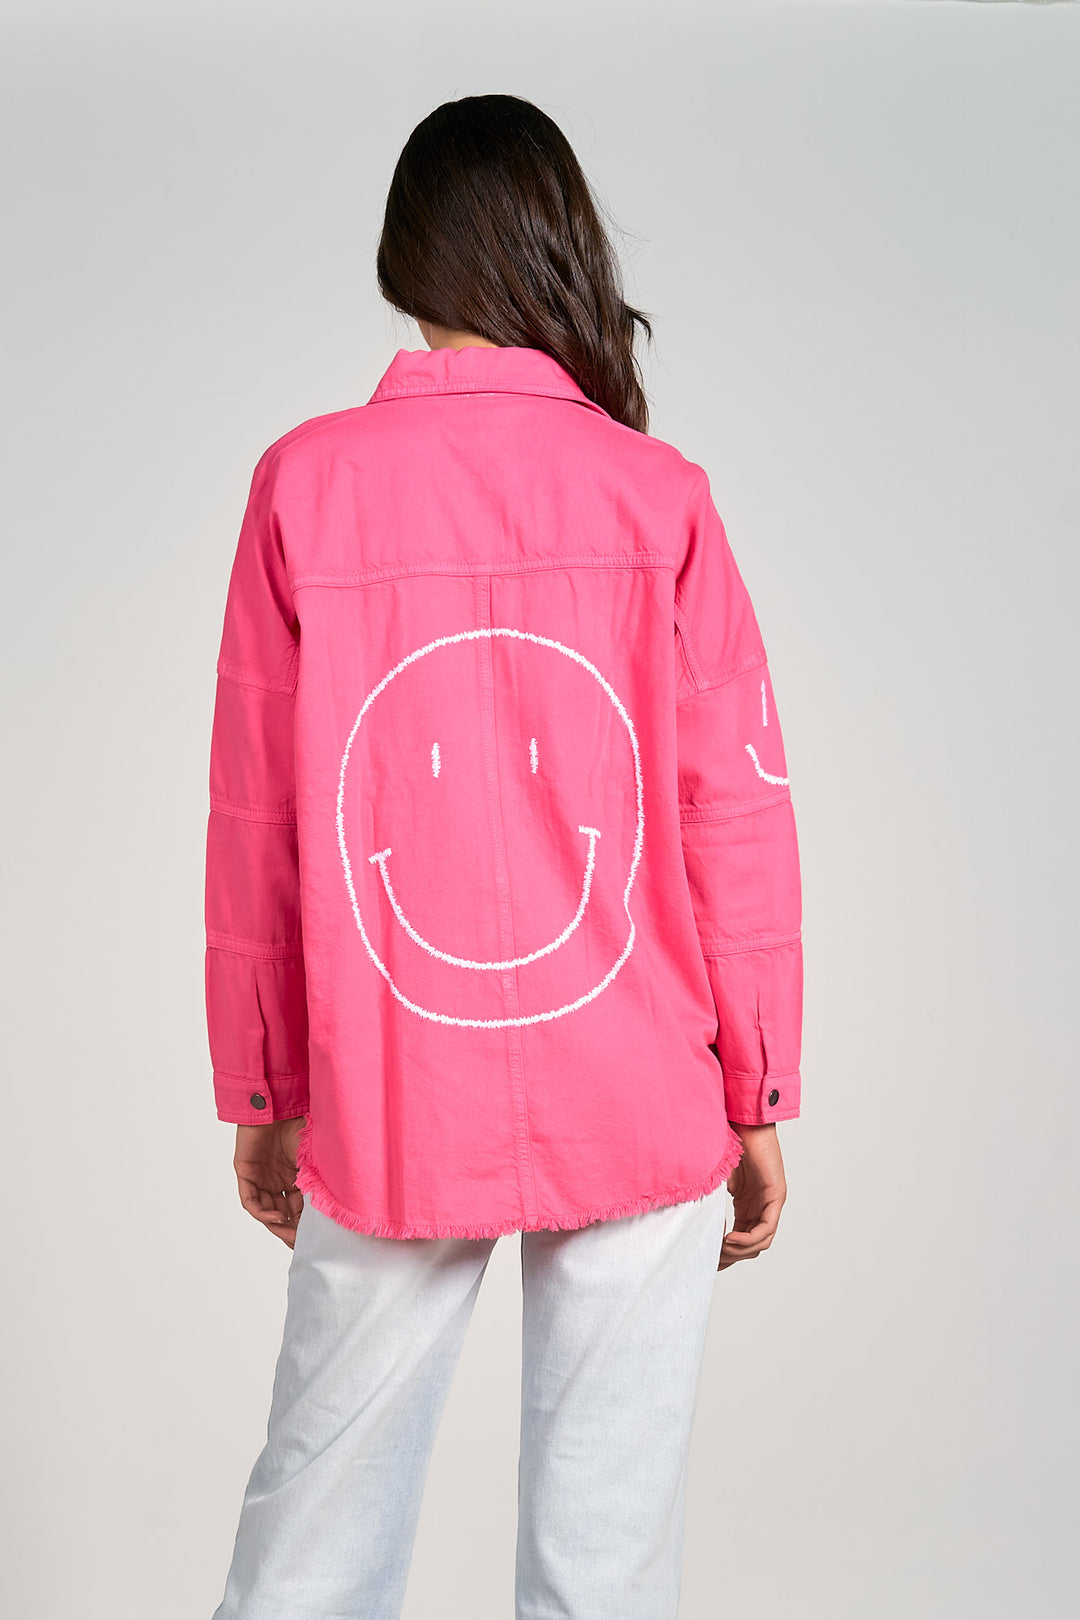 SMILEY FACE BUTTON UP JACKET - FUCHSIA HAPPY - Kingfisher Road - Online Boutique